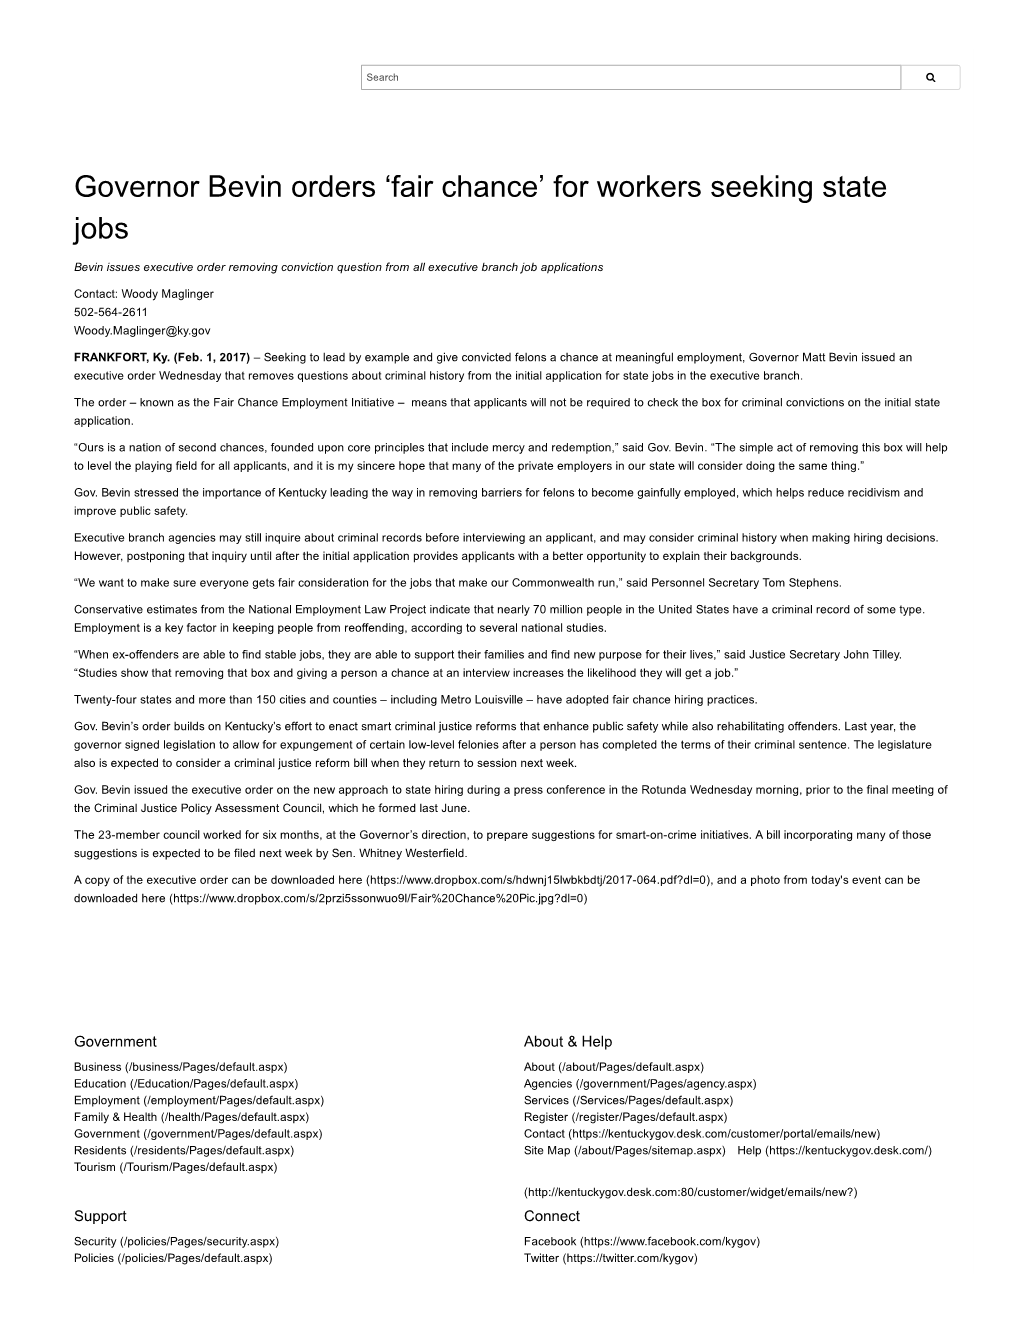 Governor Bevin Orders 'Fair Chance' for Workers Seeking State Jobs